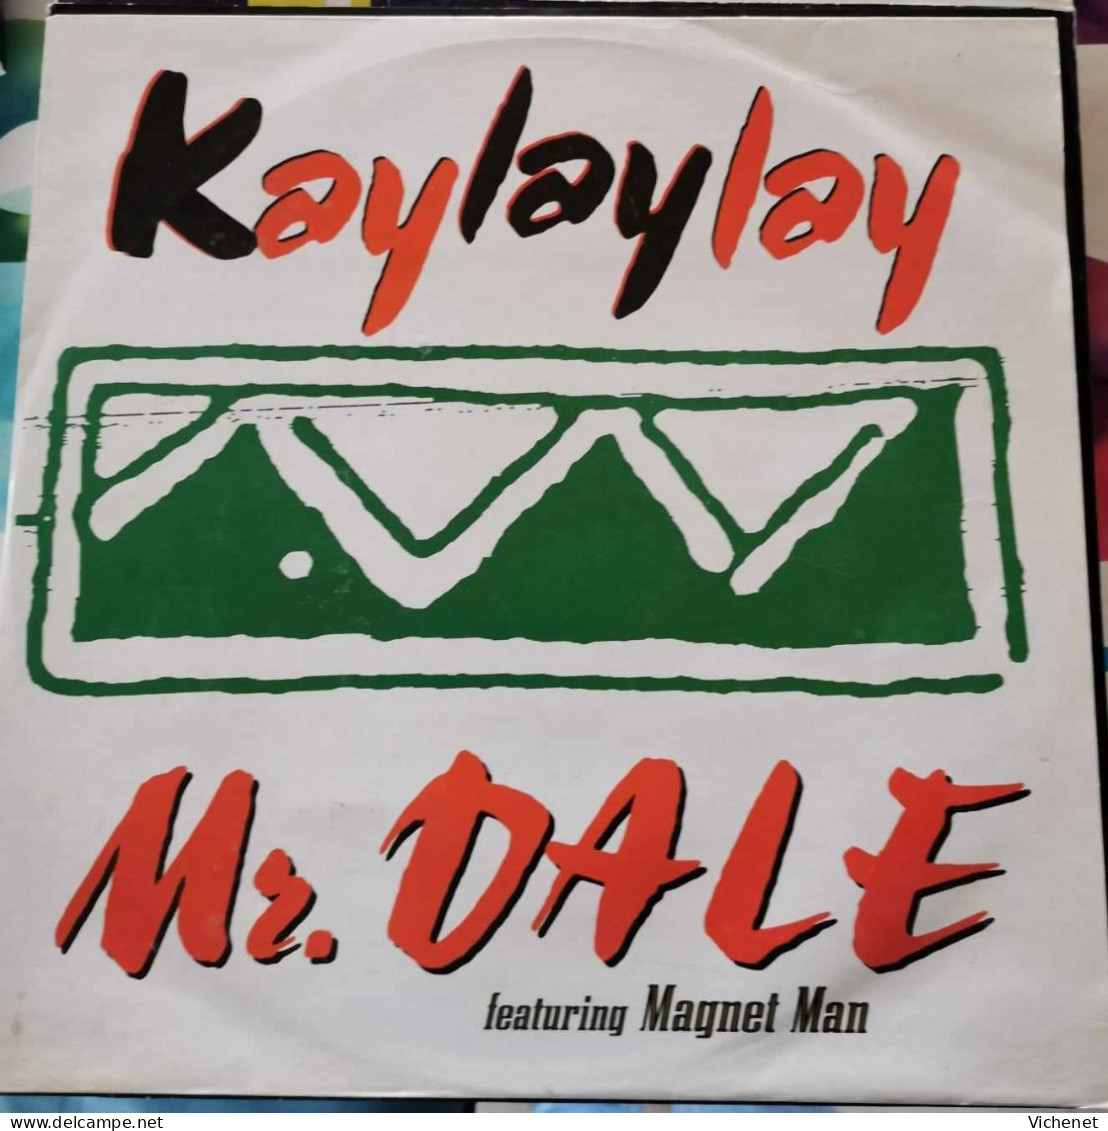 Mr. Dale Featuring Magnet Man – Kaylaylay - Maxi - 45 Rpm - Maxi-Singles